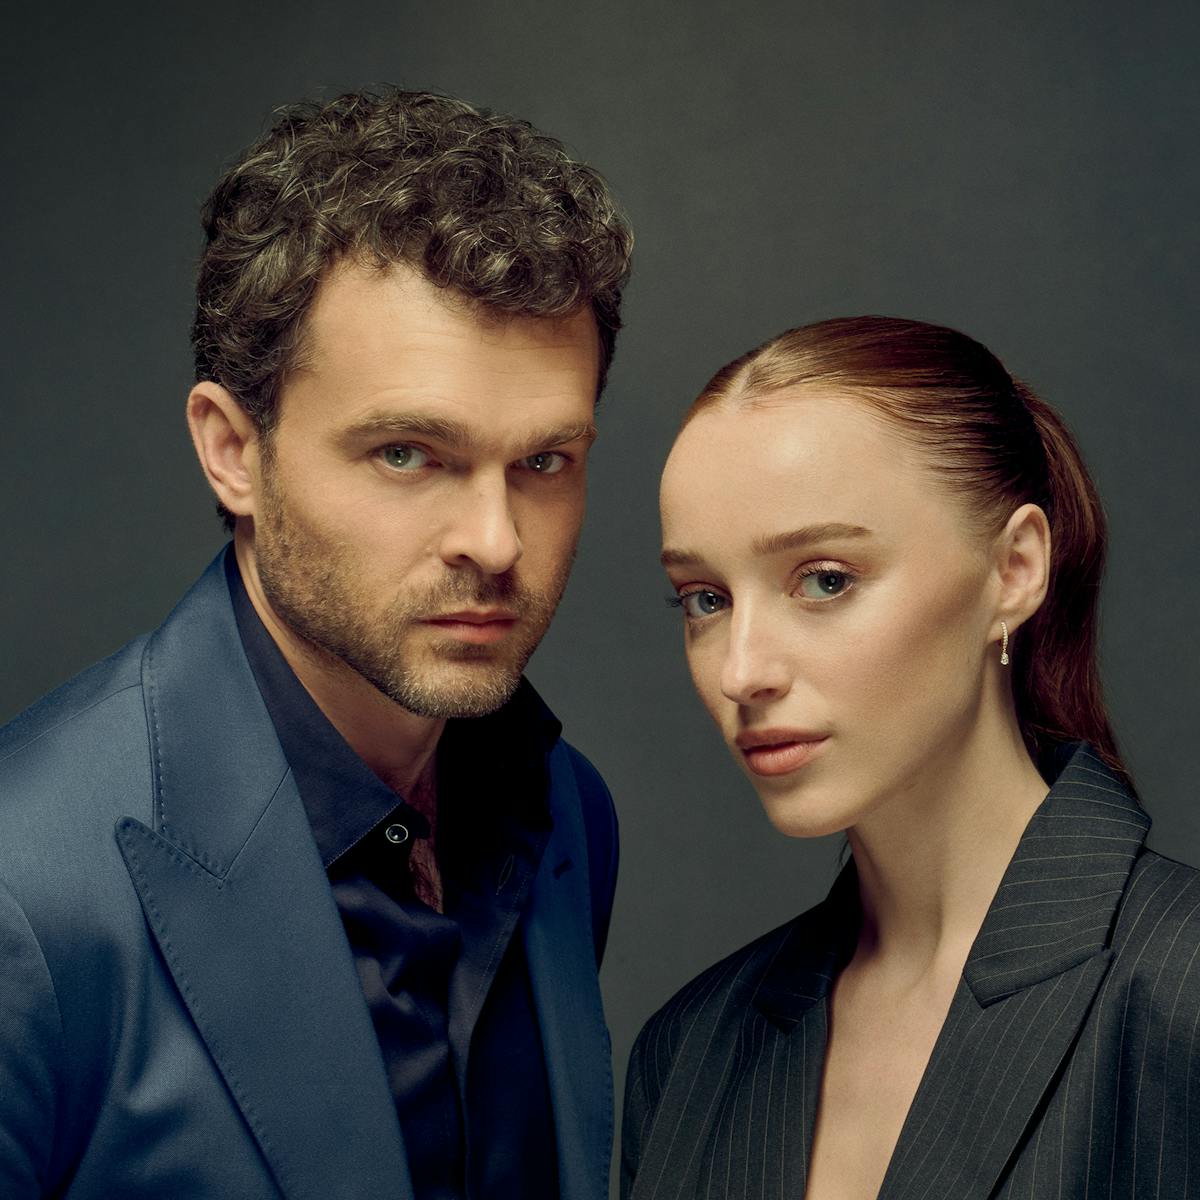 Alden Ehrenreich and Phoebe Dynevor pose in navy and black blazers, respectively, looking snatched and serious.